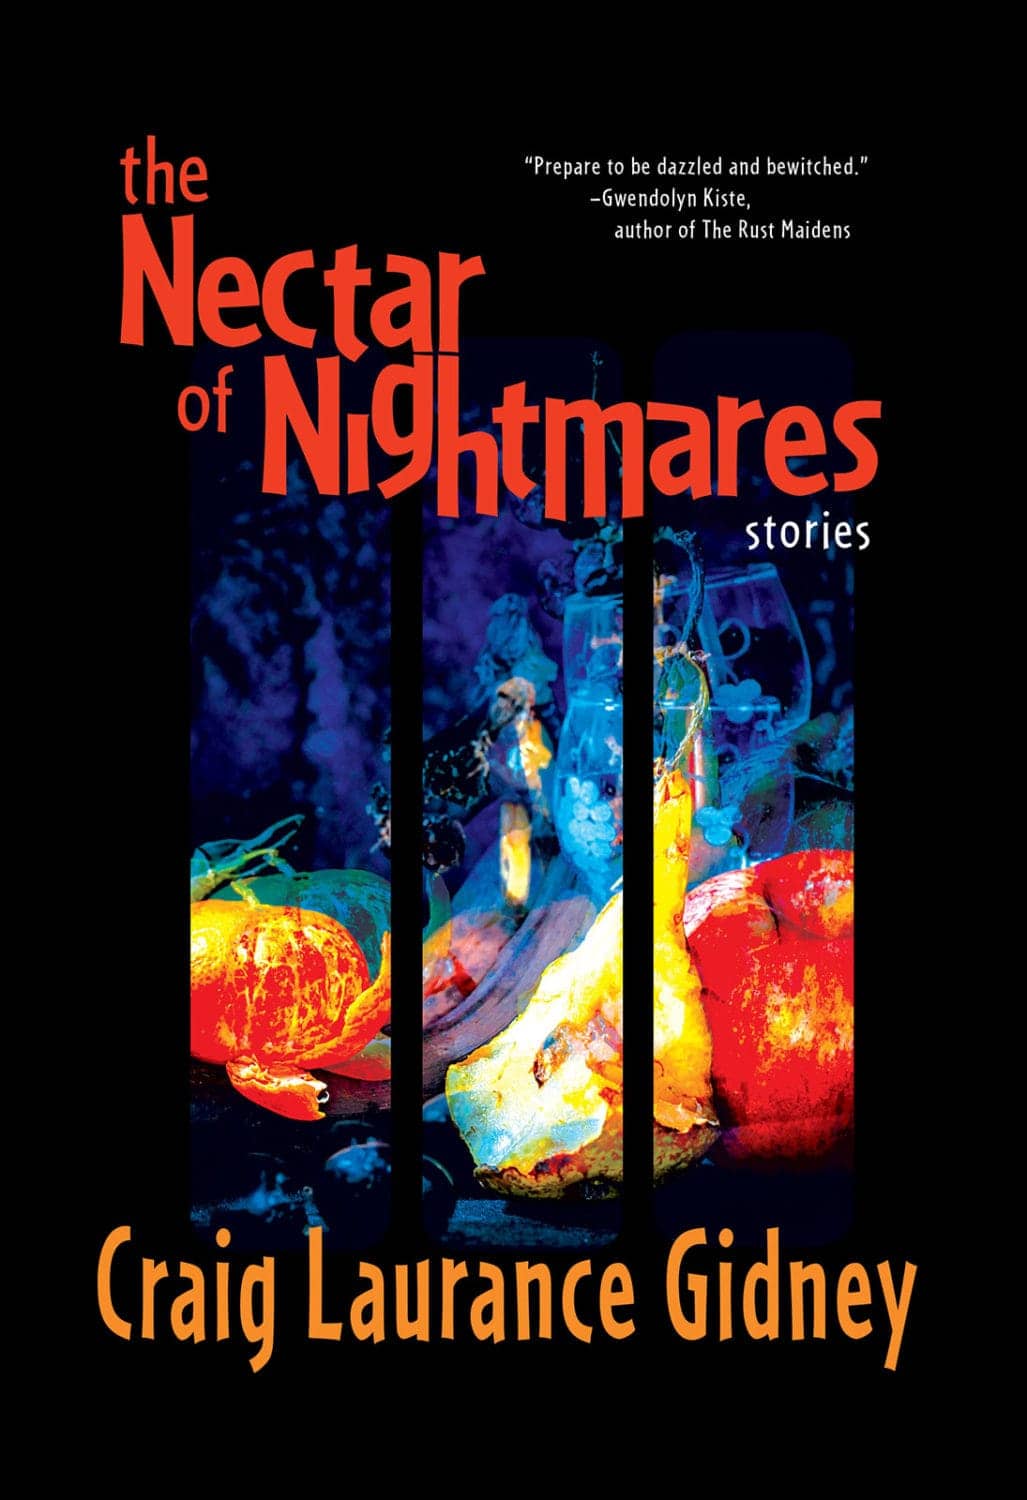 The-Nectar-of-Nightmares-by-Craig-Gidney-StokerCon-0522, StokerCon 2022 was like a Black family reunion, but the struggle is far from over, Culture Currents News & Views 